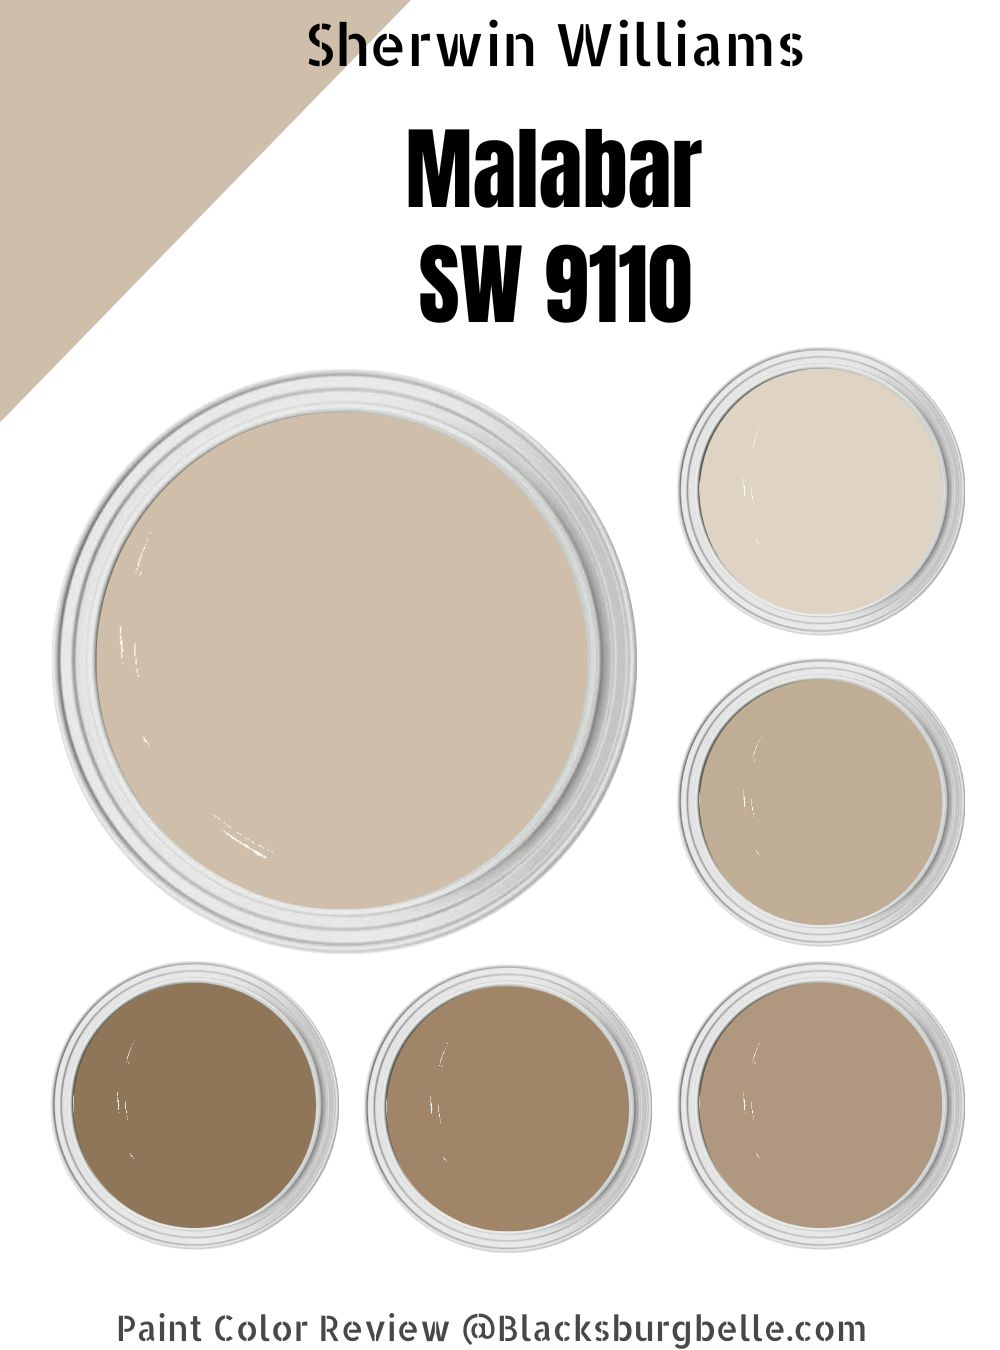 Sherwin Williams Malabar (SW 9110) Paint Color Review